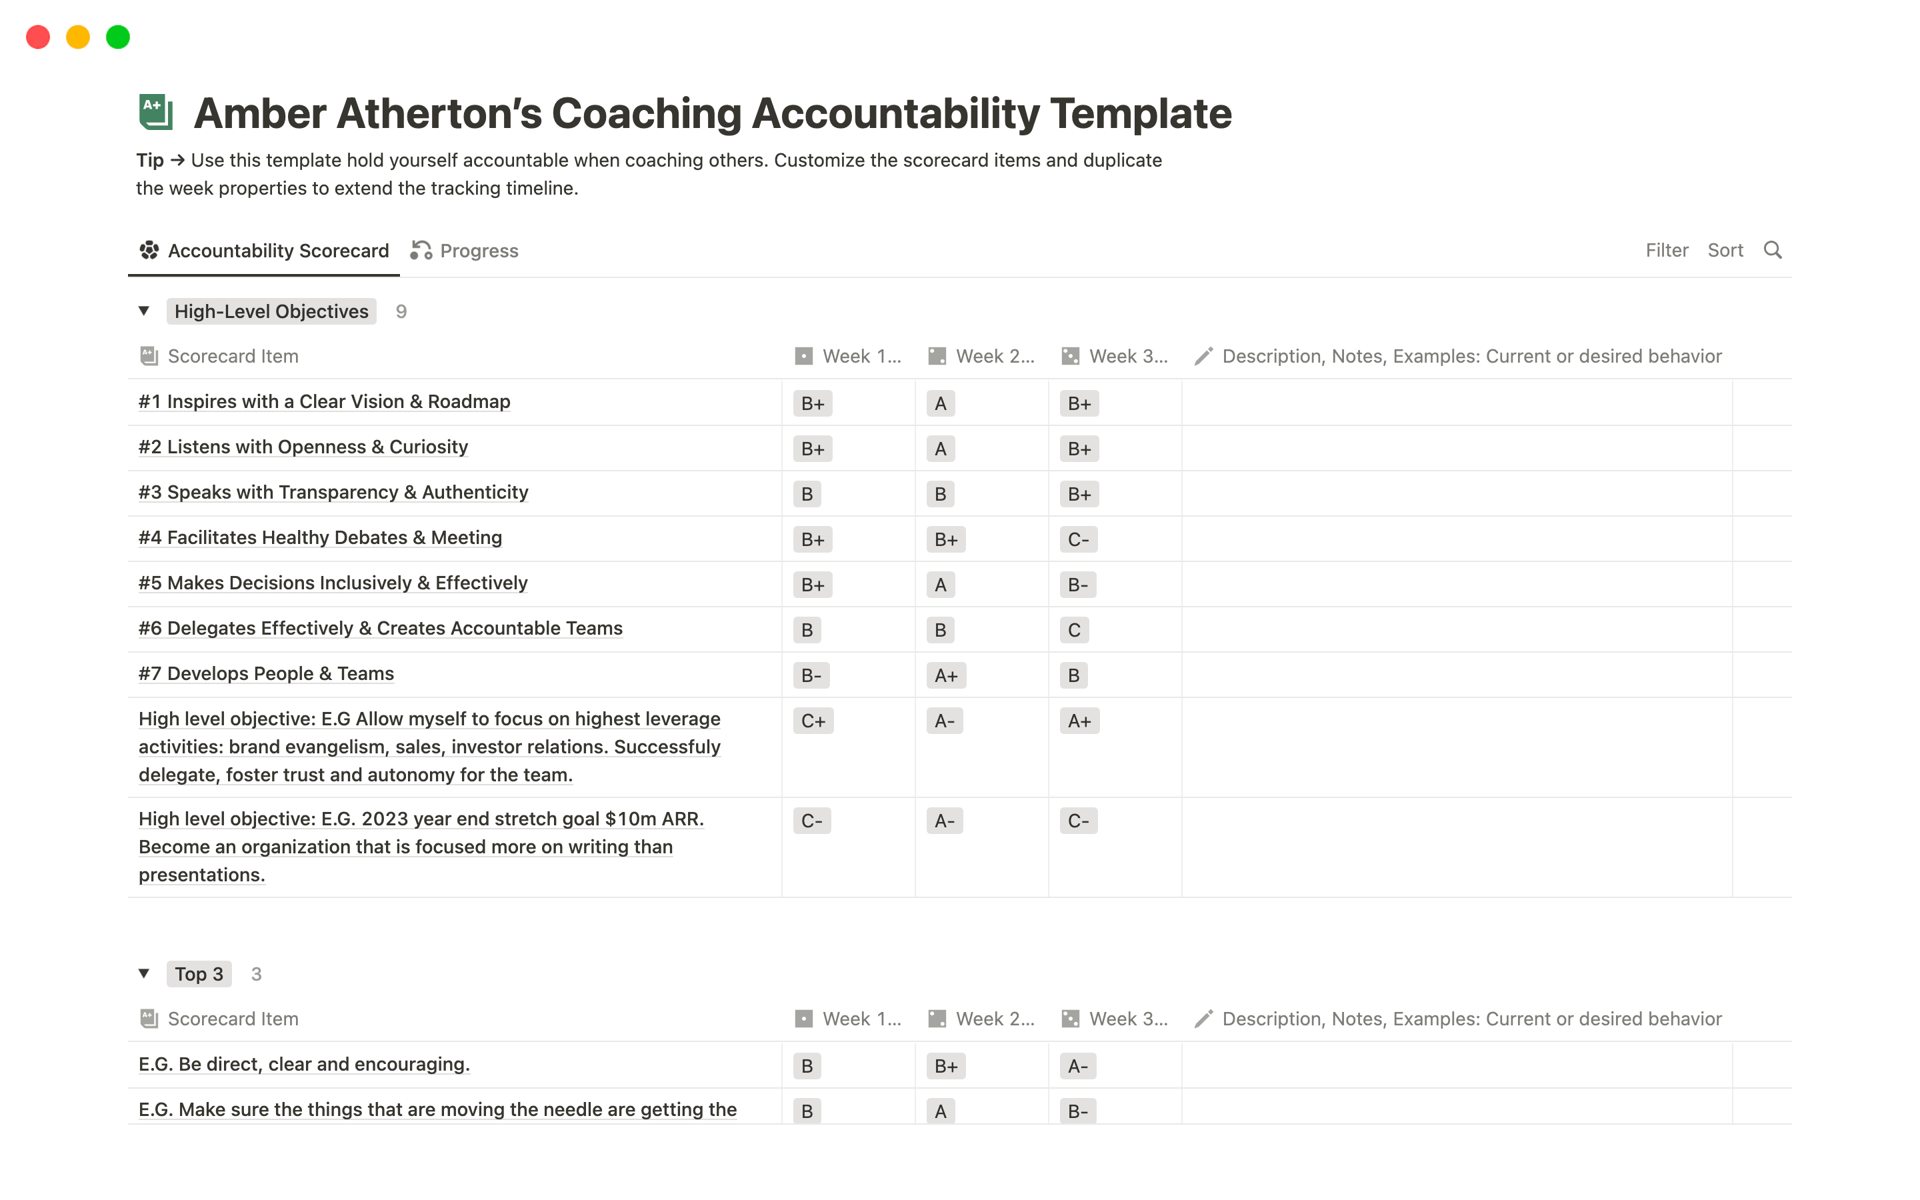 Use this template hold yourself accountable when coaching others.